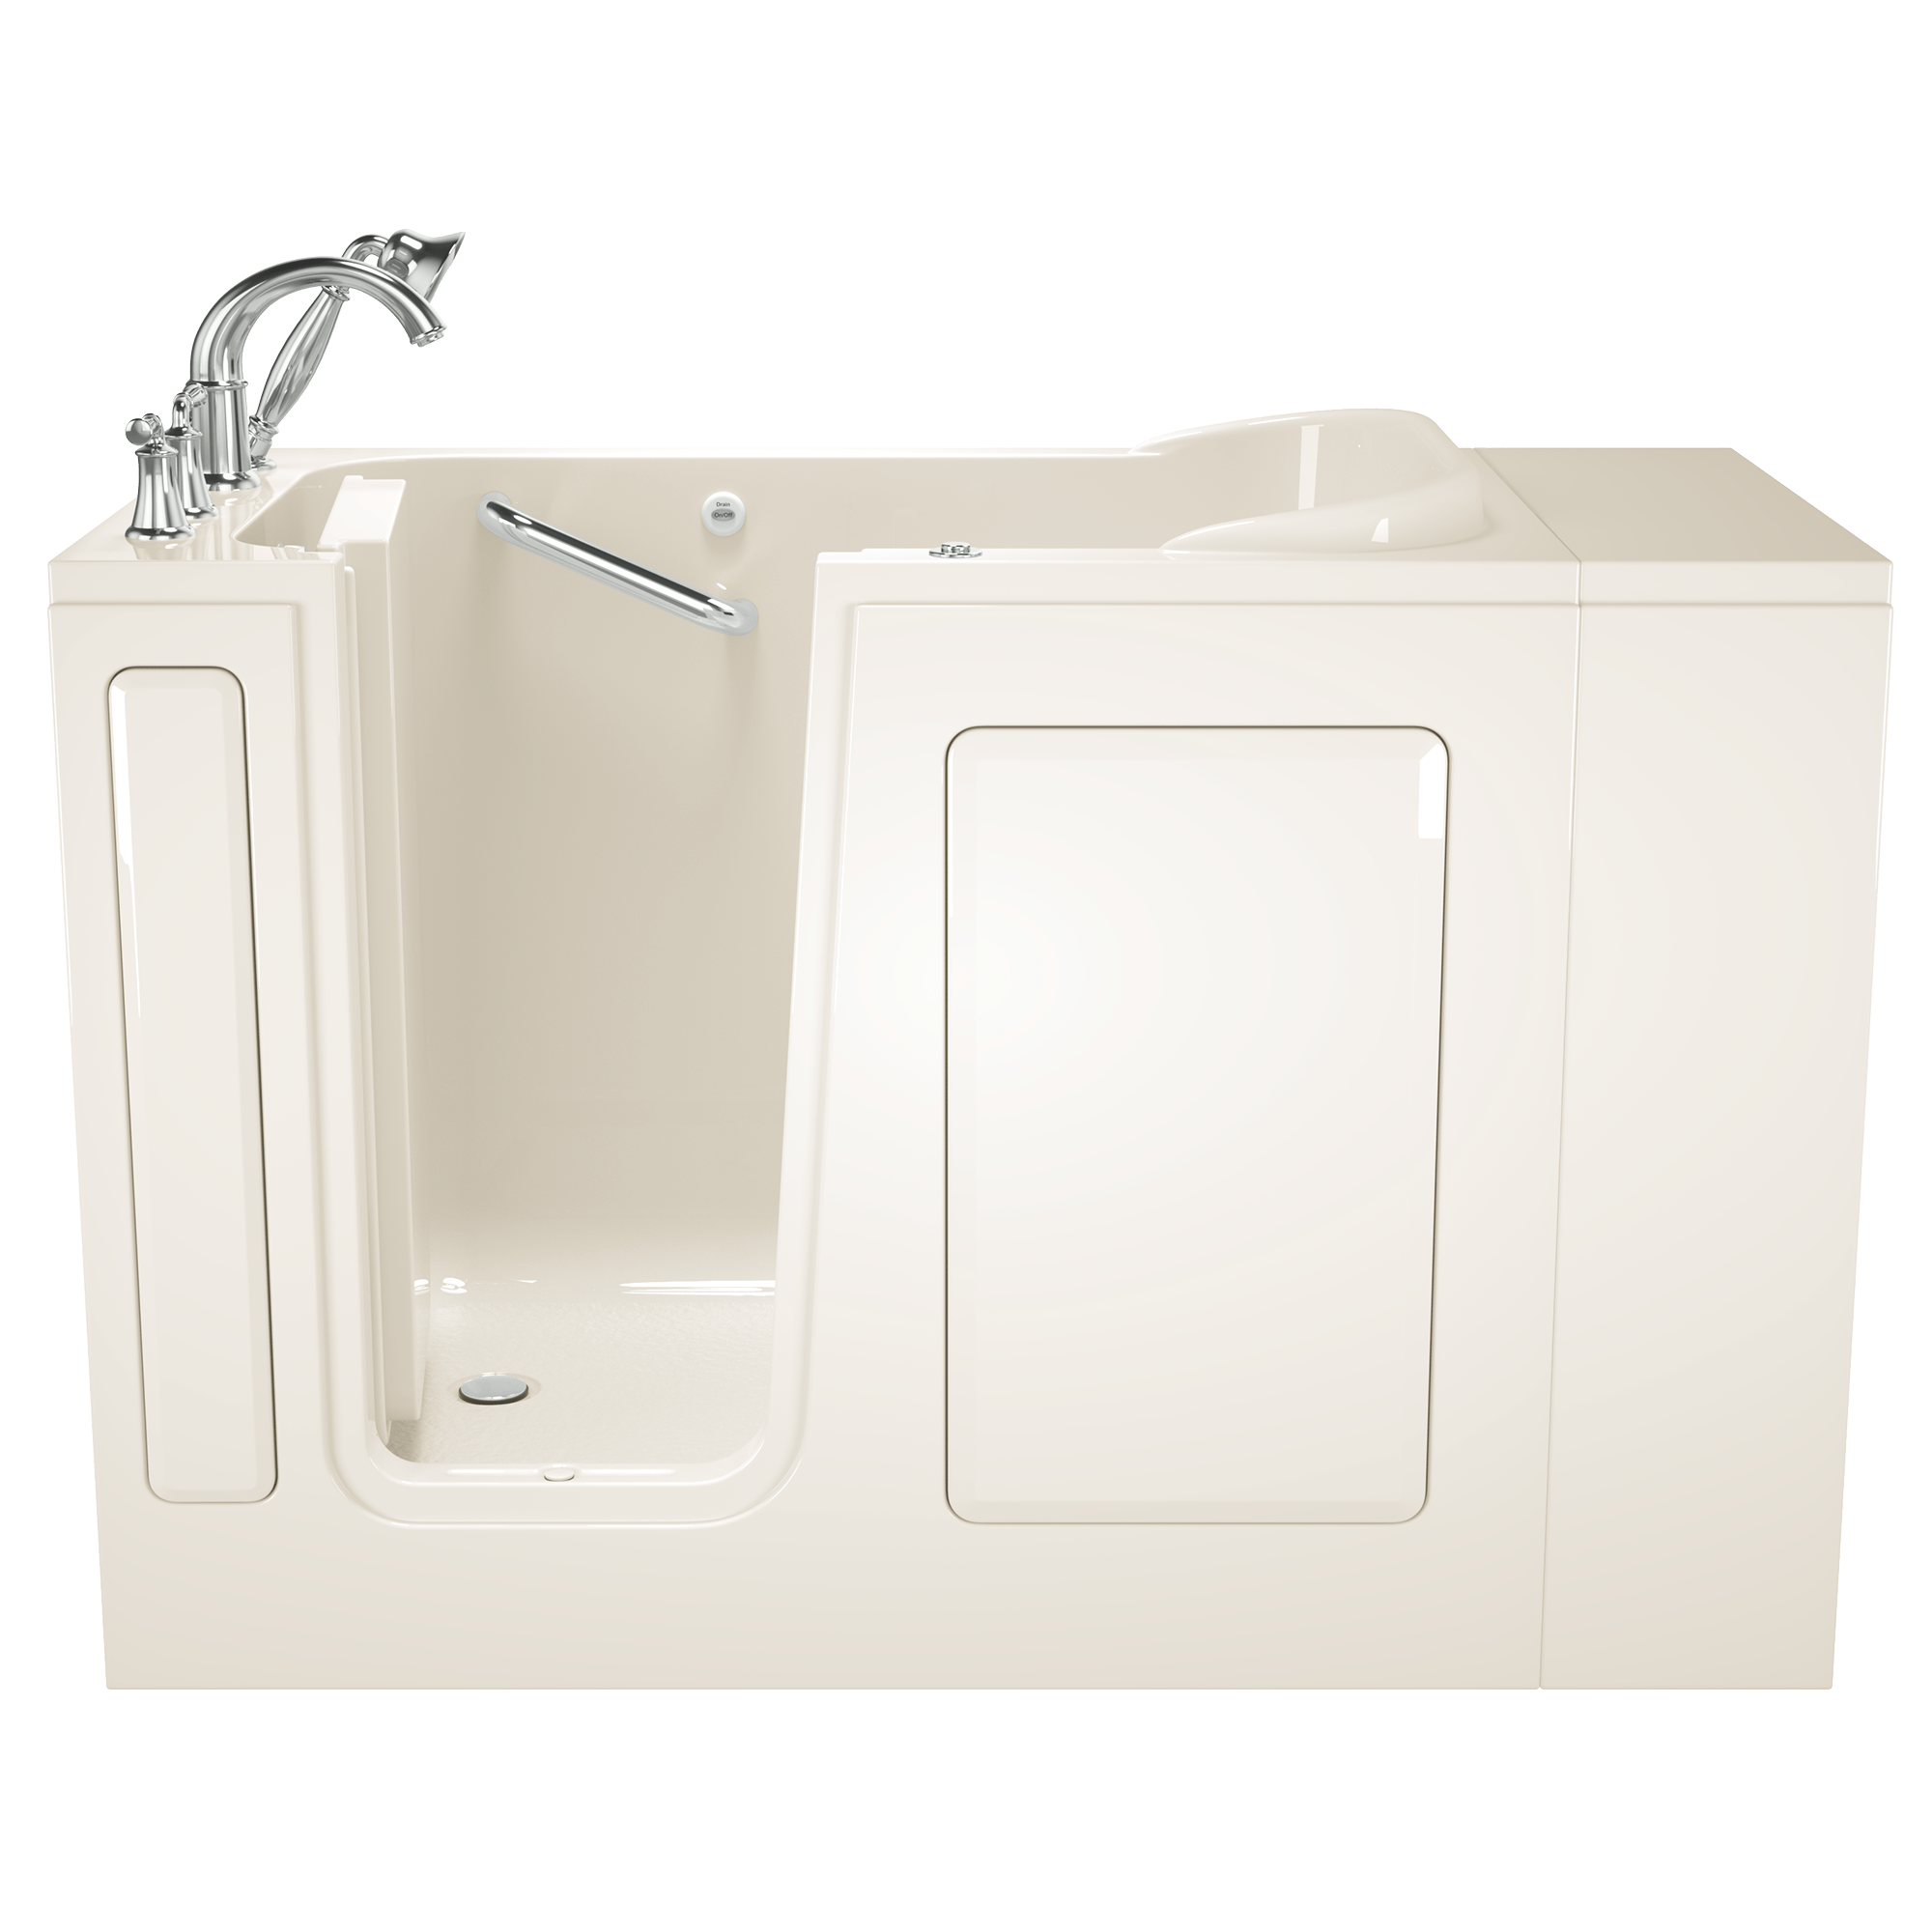 Gelcoat Value Series 28x48 inch Walk in Bathtub with Whirlpool System  Left Hand Door and Drain WIB LINEN